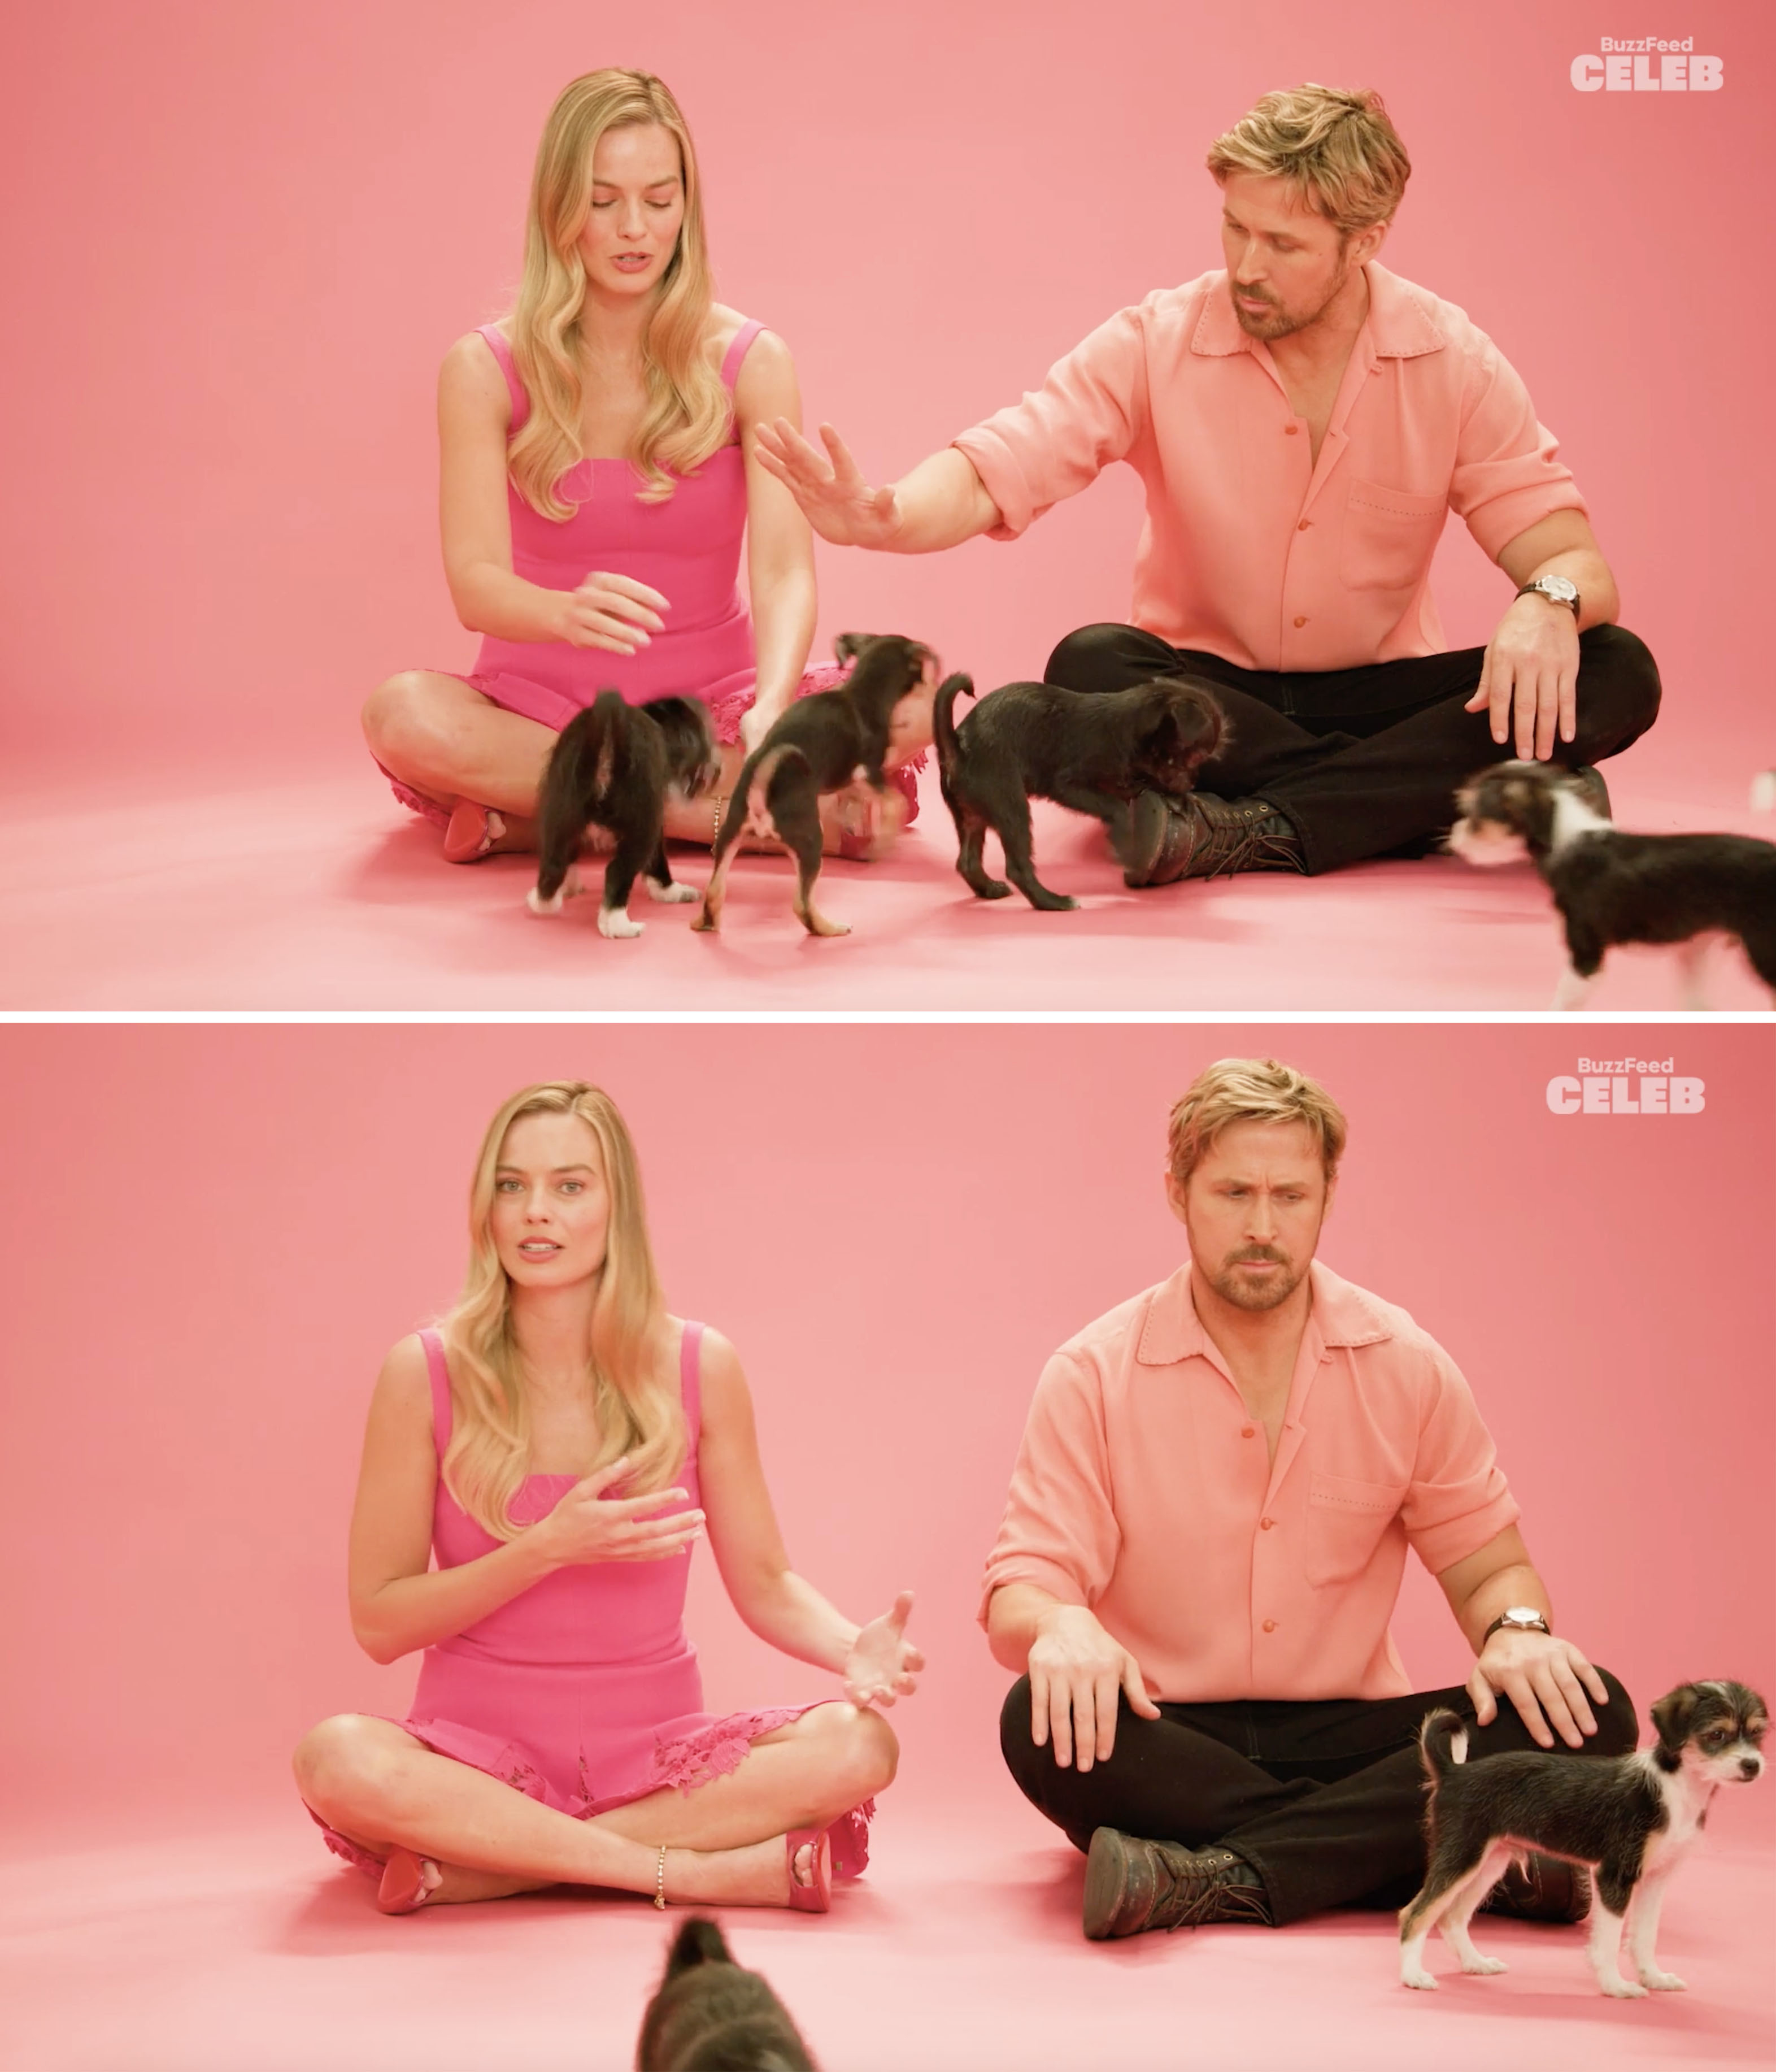 More of Margot and Ryan sitting and playing with puppies